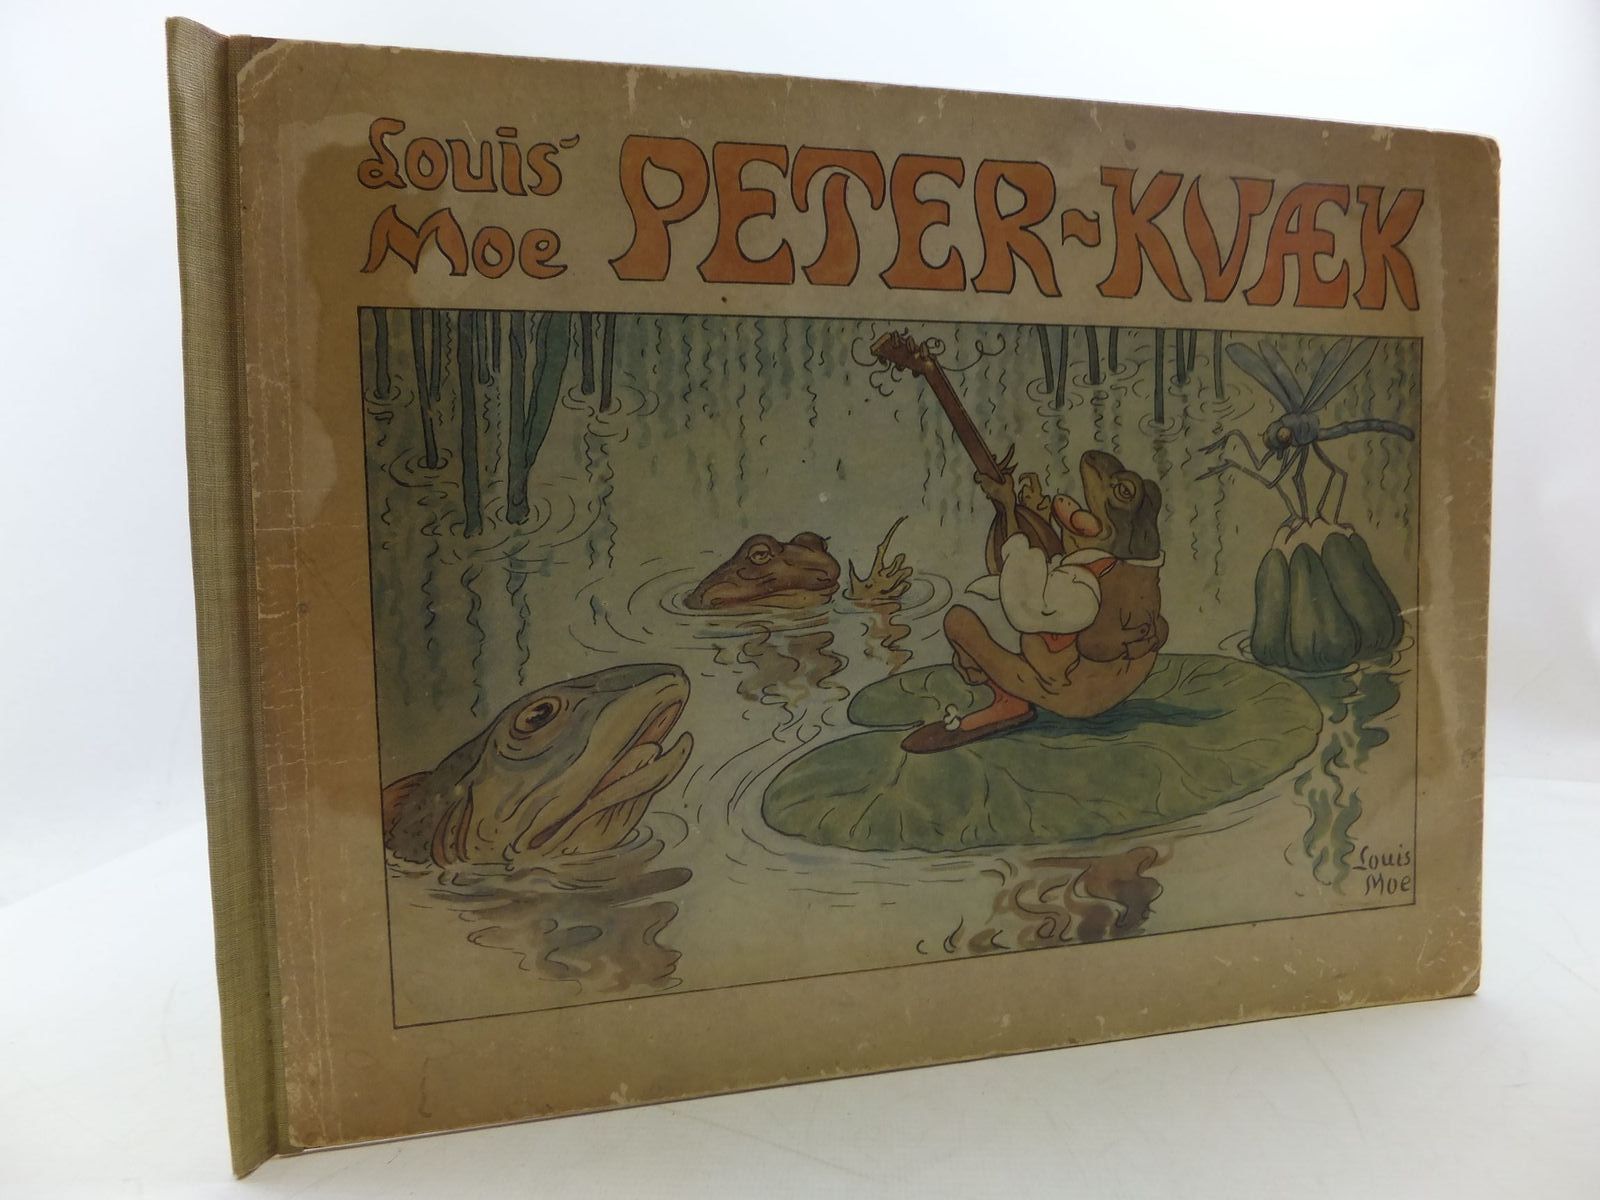 Photo of PETER-KVAEK written by Moe, Louis illustrated by Moe, Louis published by Henrik Koppels Forlag (STOCK CODE: 1108586)  for sale by Stella & Rose's Books